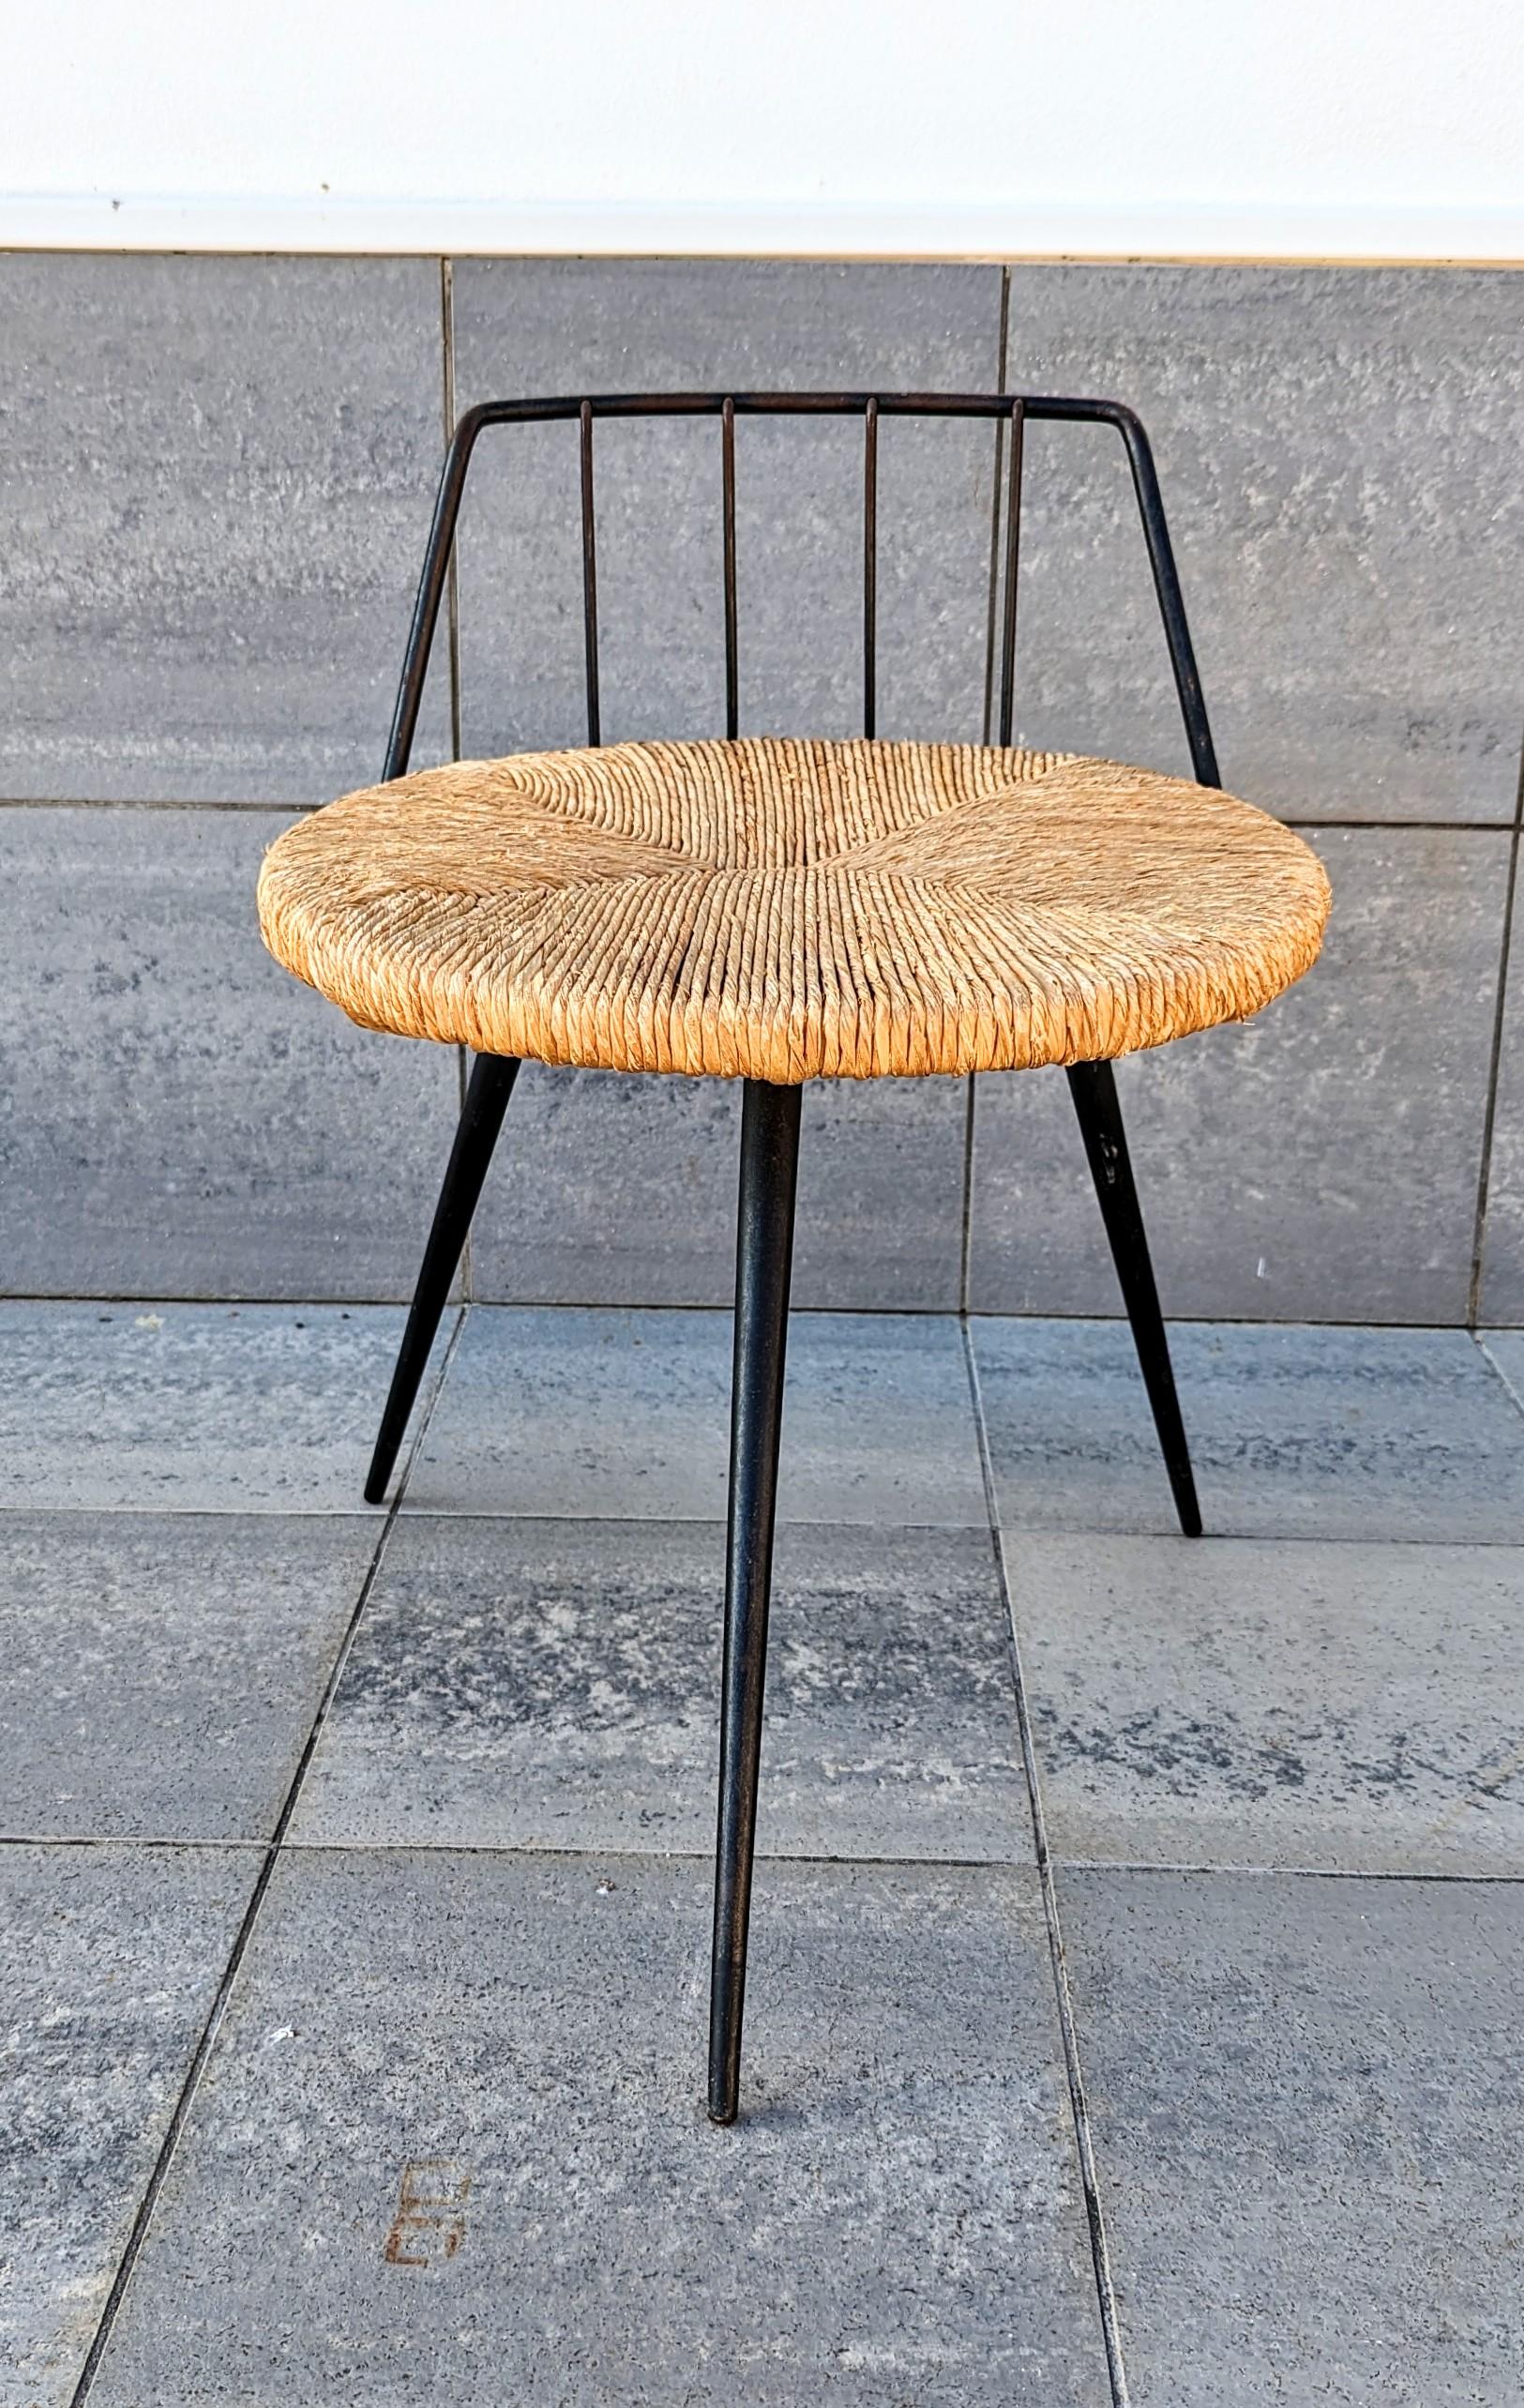 Rare and beautiful iron and straw stool manufactured in France in 1960s. Very decorative and practical with its three feet. Ideal for additional seating in a living room or near a fireplace.